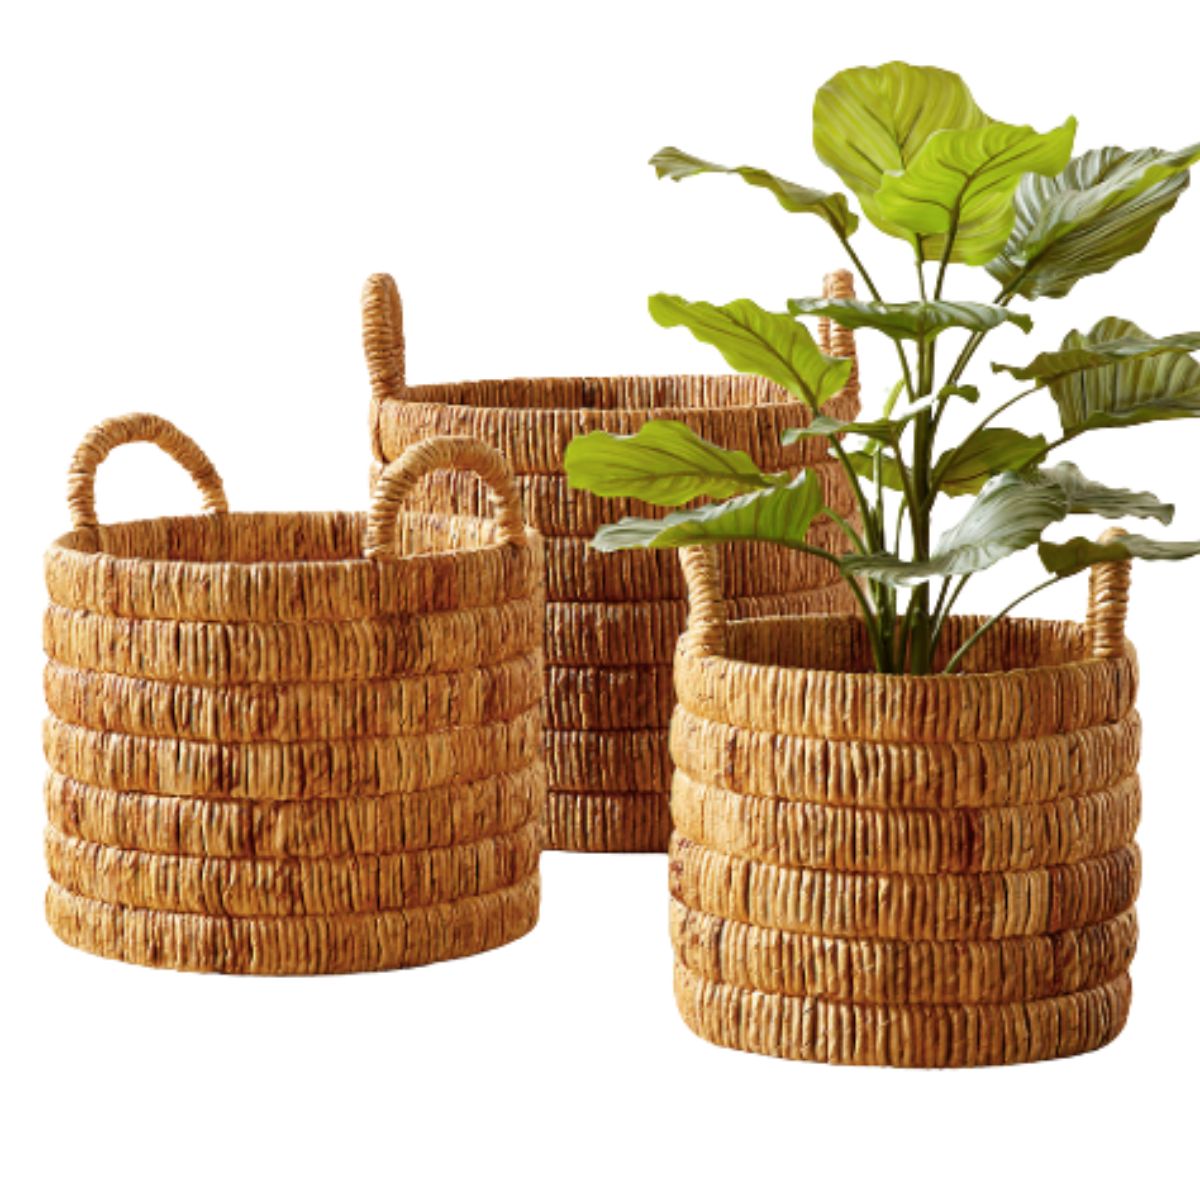 3 Handwoven Banana Leaf Large Baskets with handles in different sizes from CB2